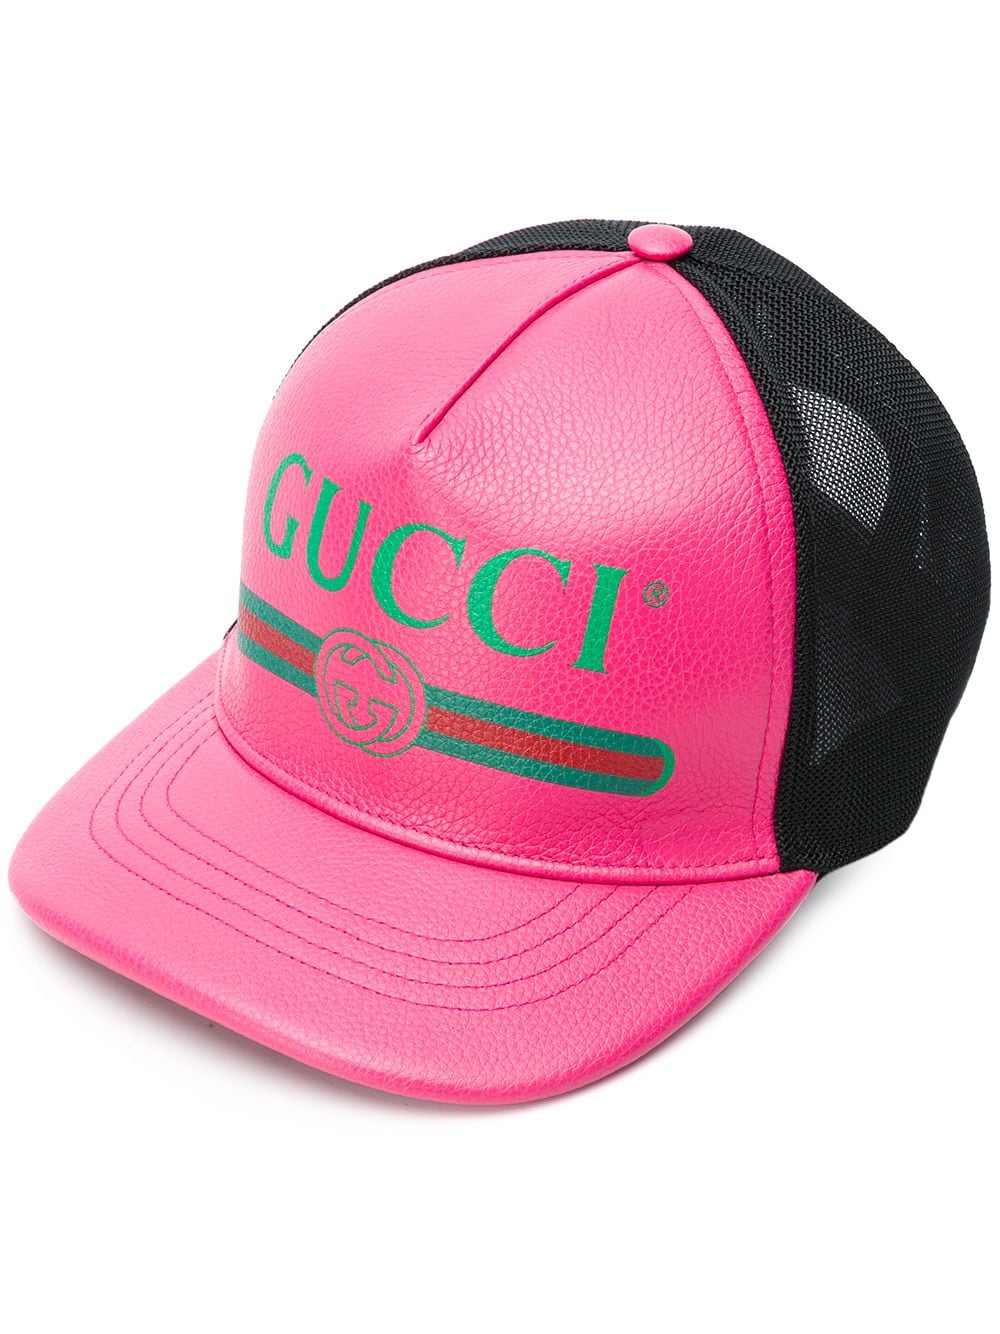 Shop pink Gucci front logo hat with 